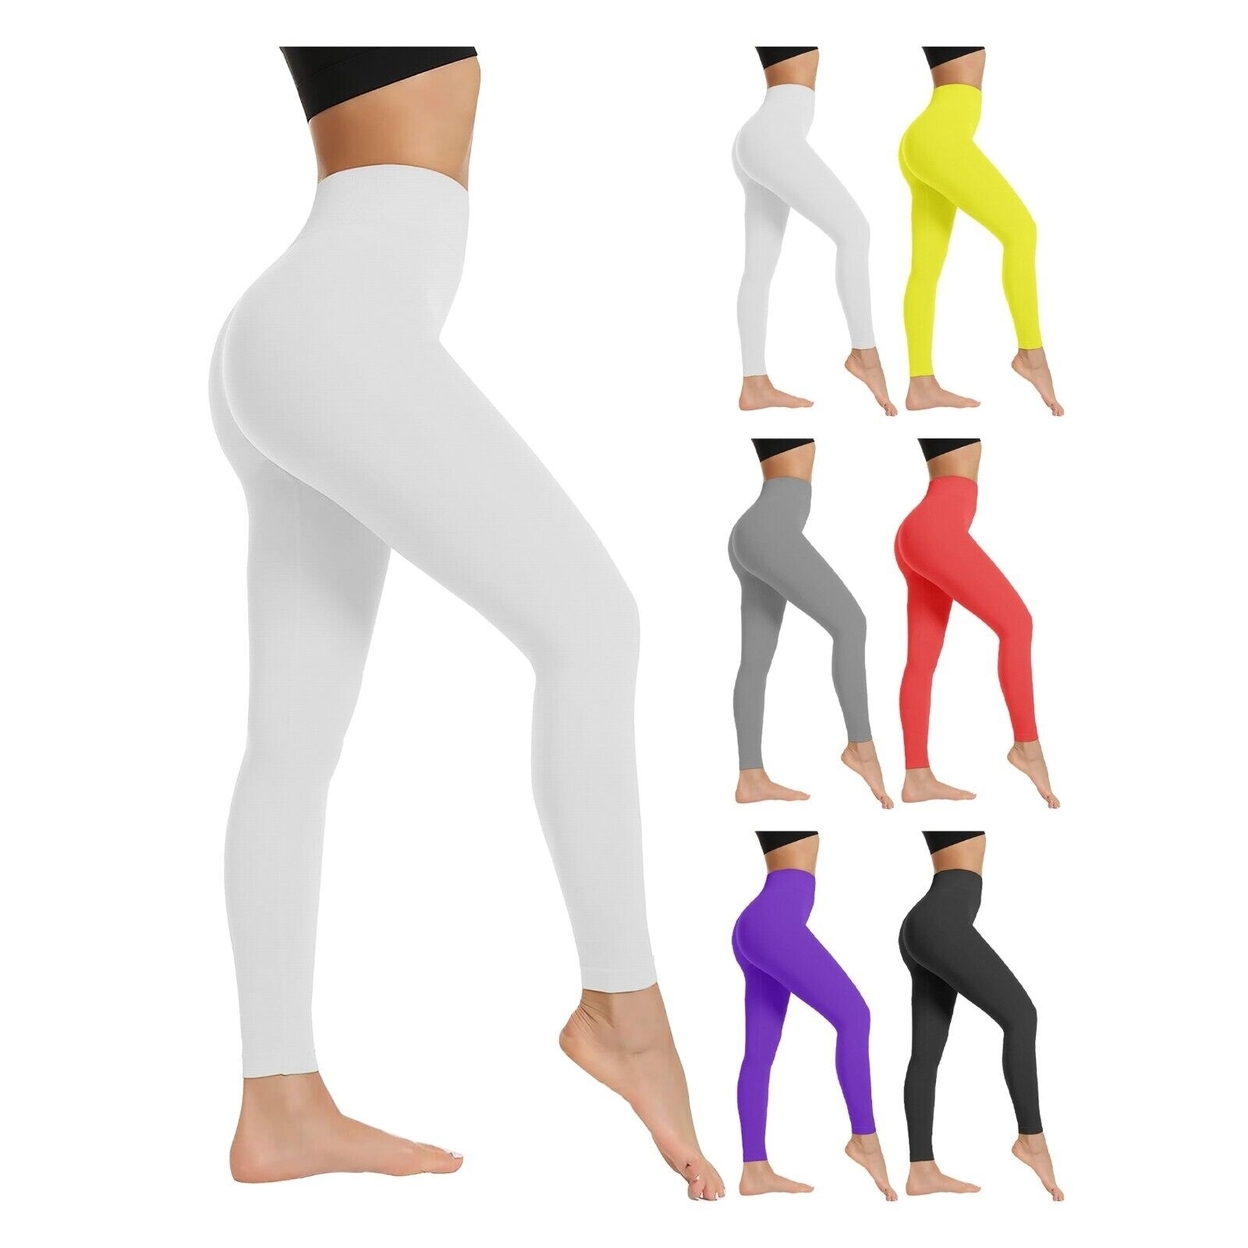 2-Pack: Women's High Waist Super Soft Active Athlete Stretch Yoga Cozy Leggings - Yellow & Yellow, X-large